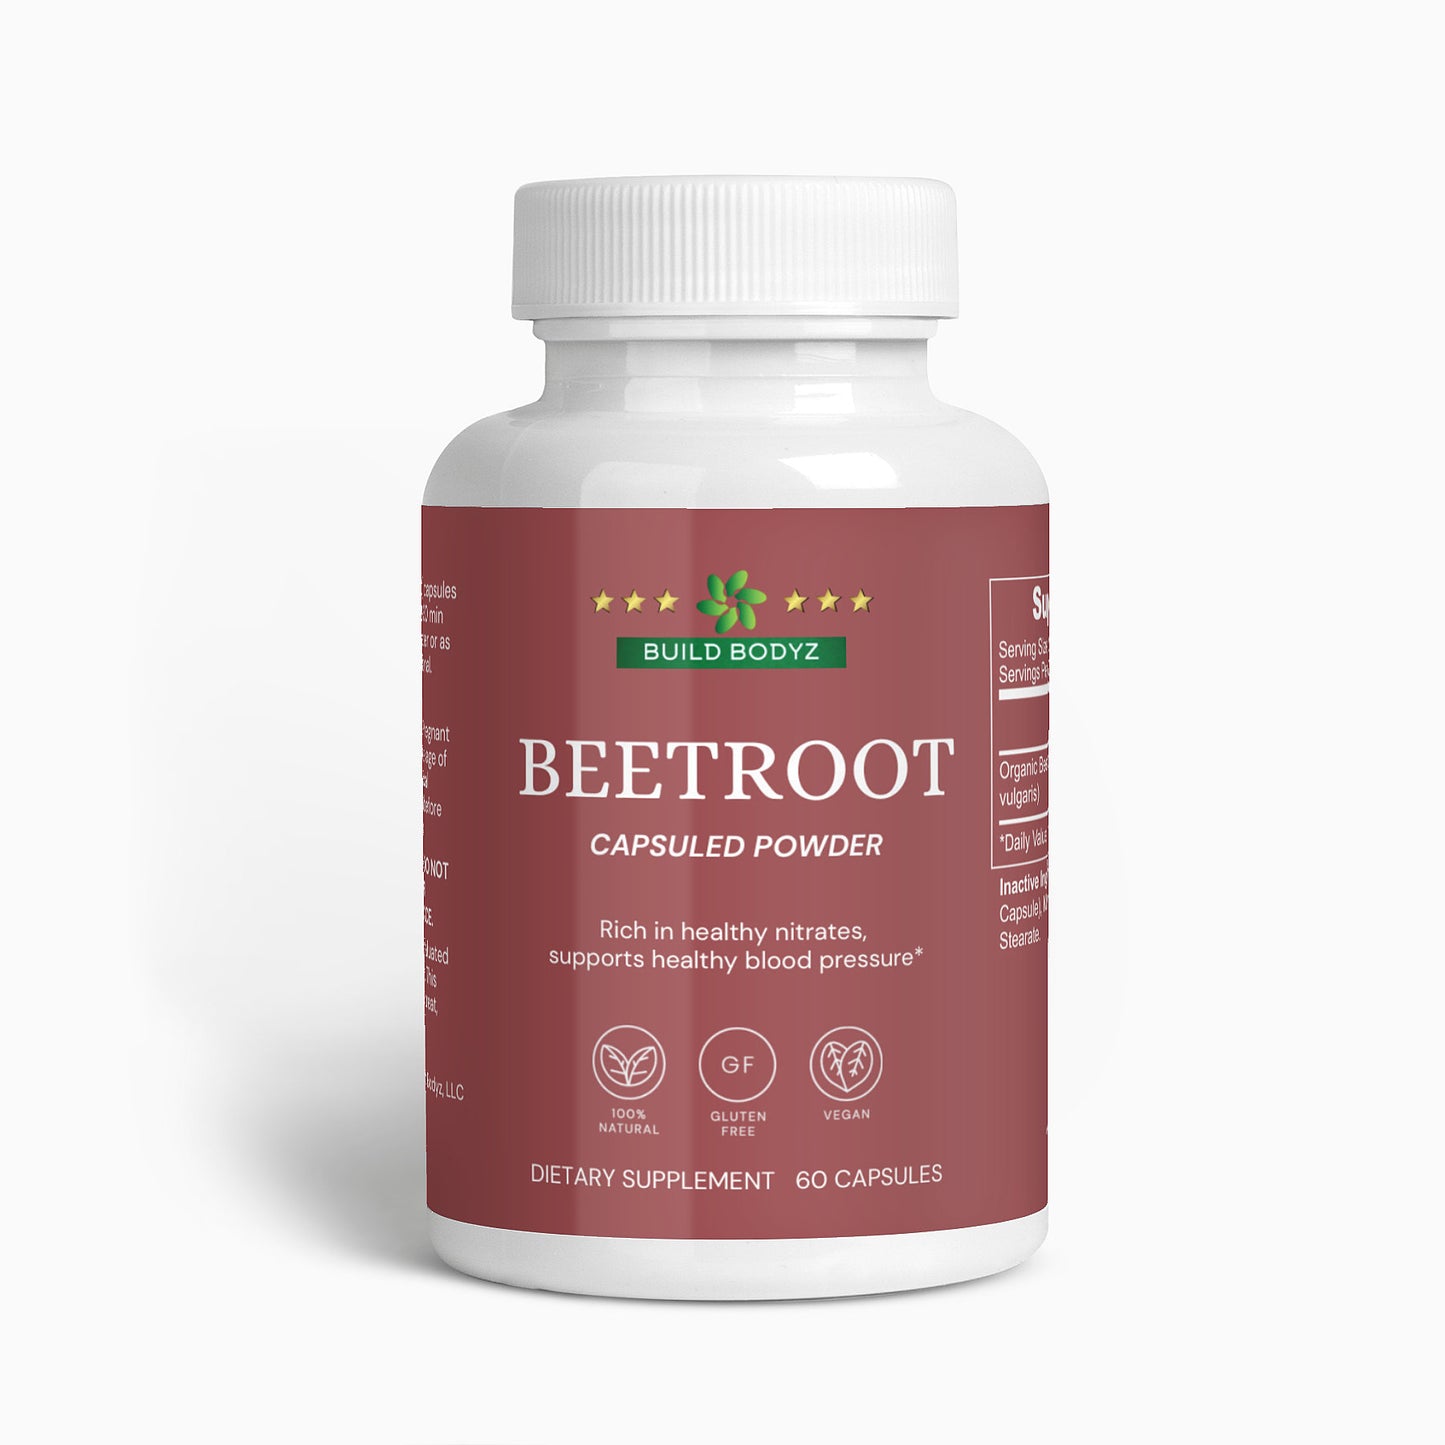 Organic Beetroot Capsules - Natural Nitric Oxide Booster with Antioxidants and Heart Health Benefits